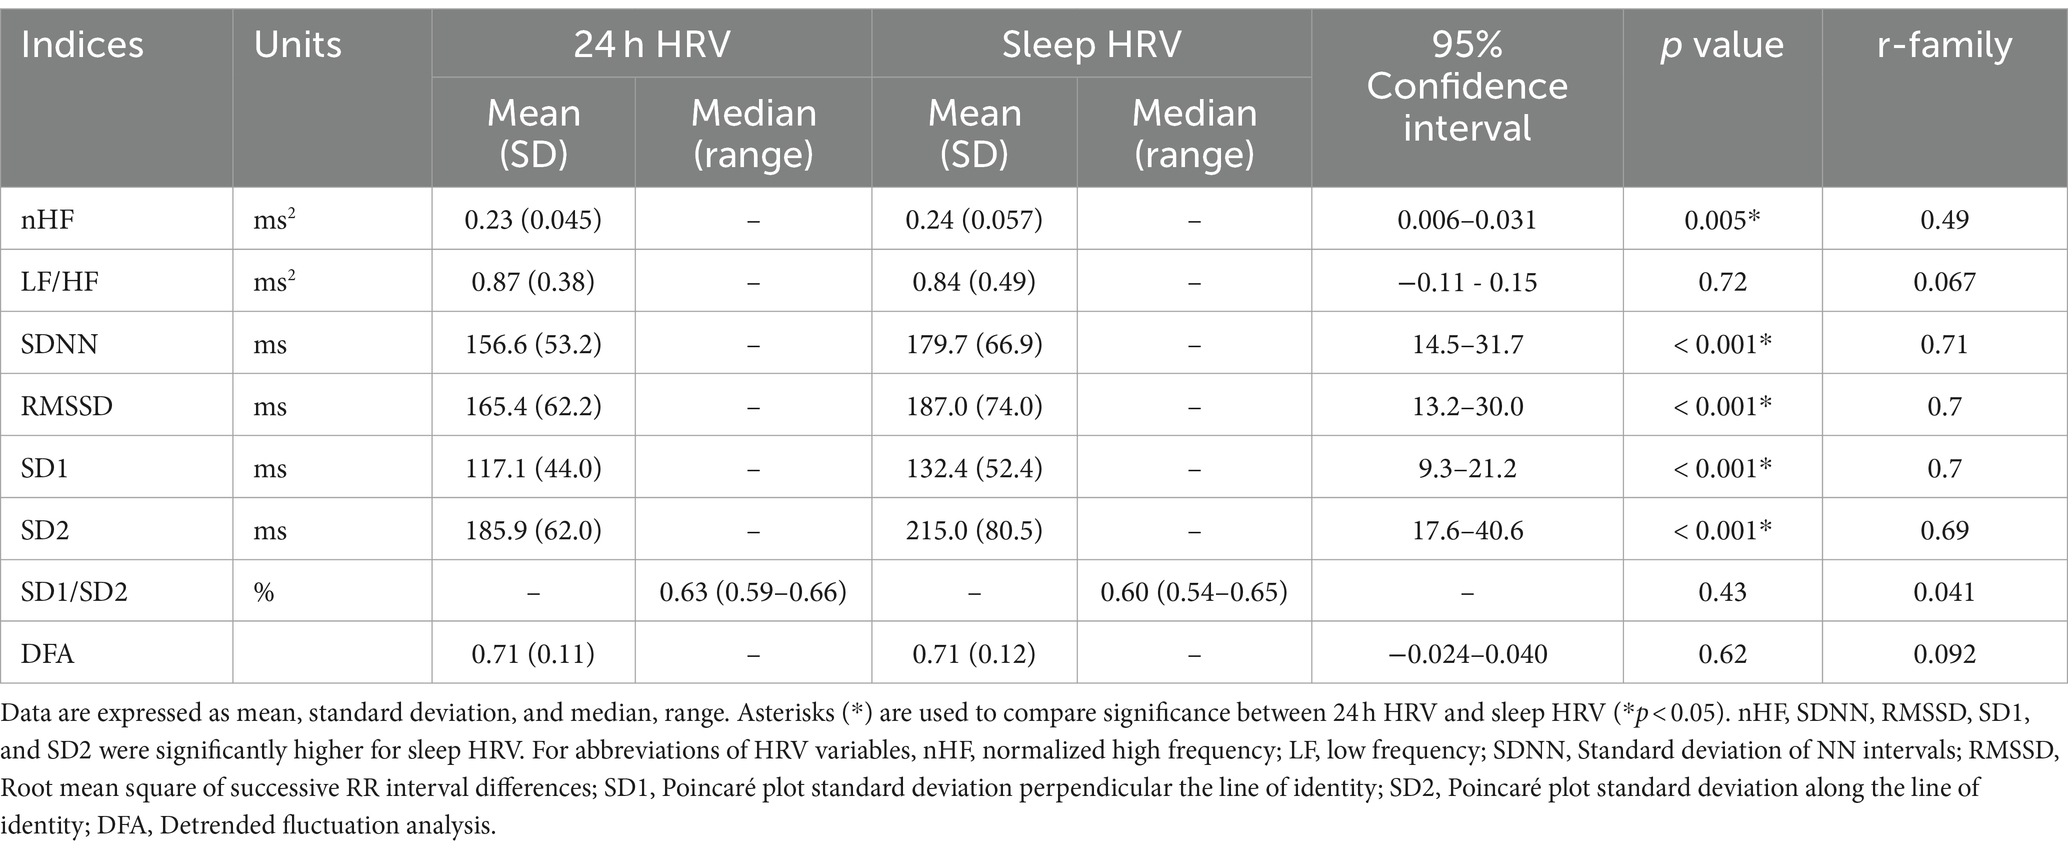 Frontiers | Exploring sleep heart rate variability: linear, nonlinear ...